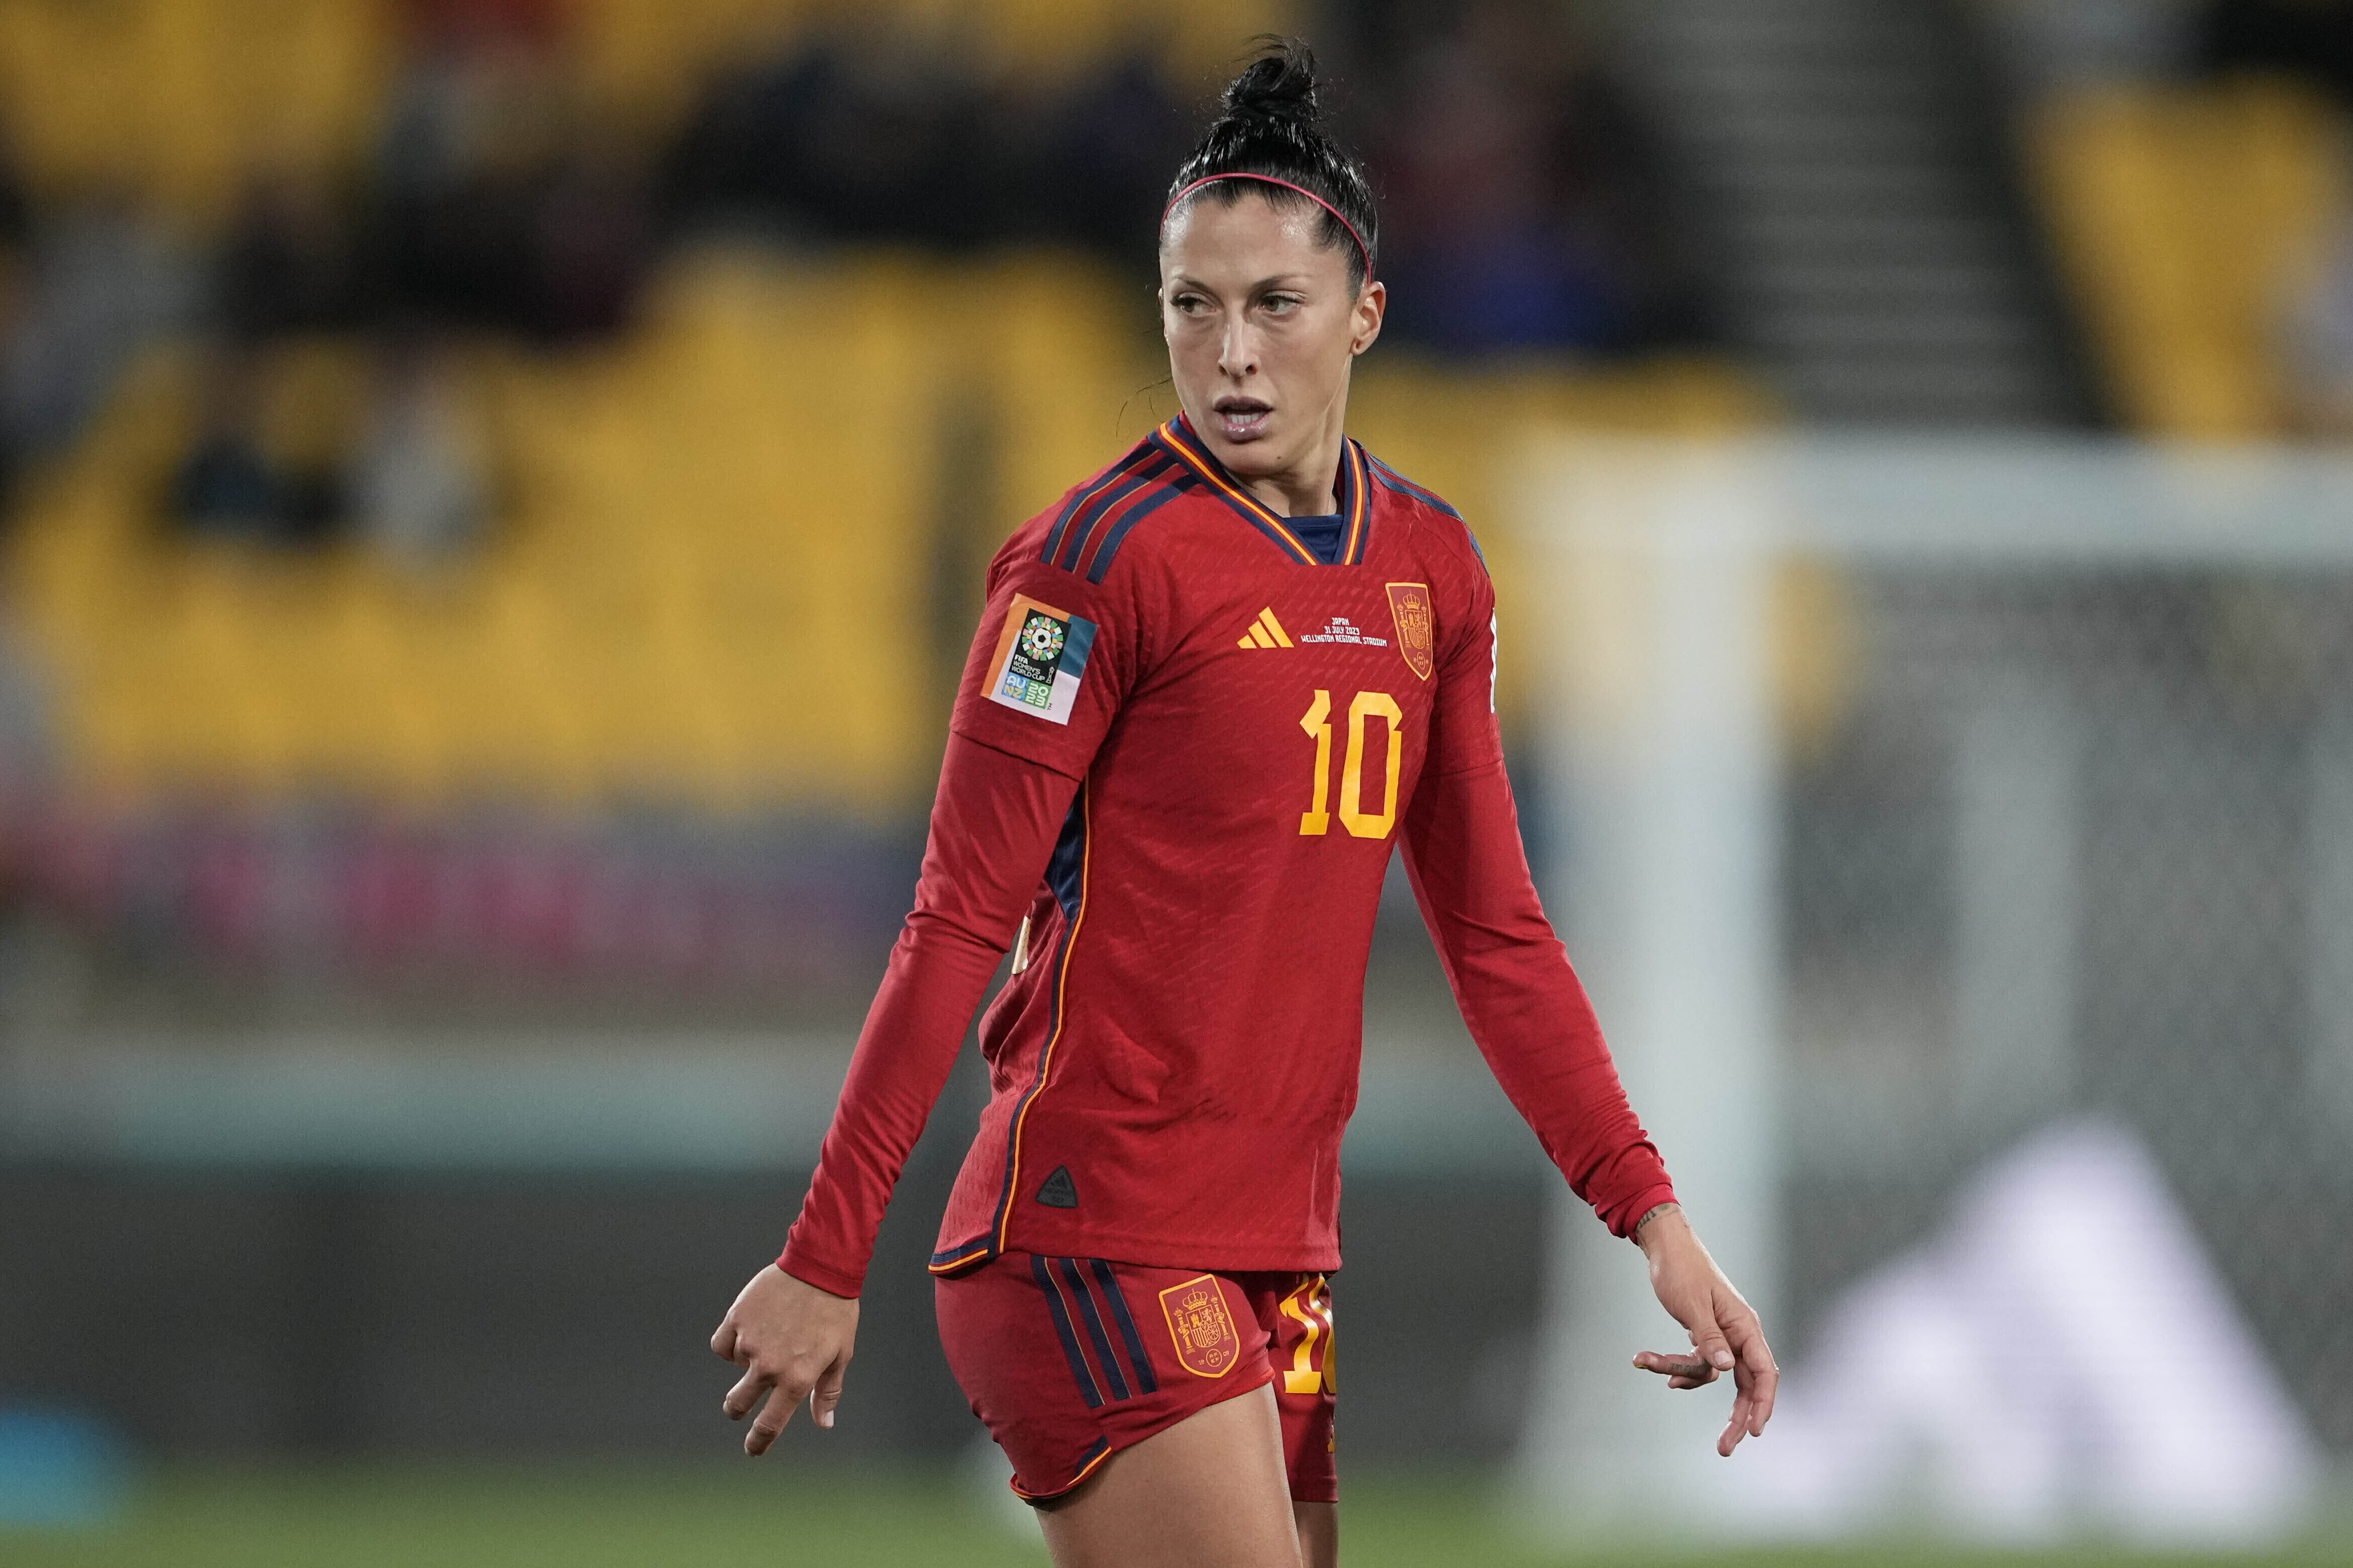 Spanish soccer player Jenni Hermoso accuses Luis Rubiales of sexual assault for World Cup kiss